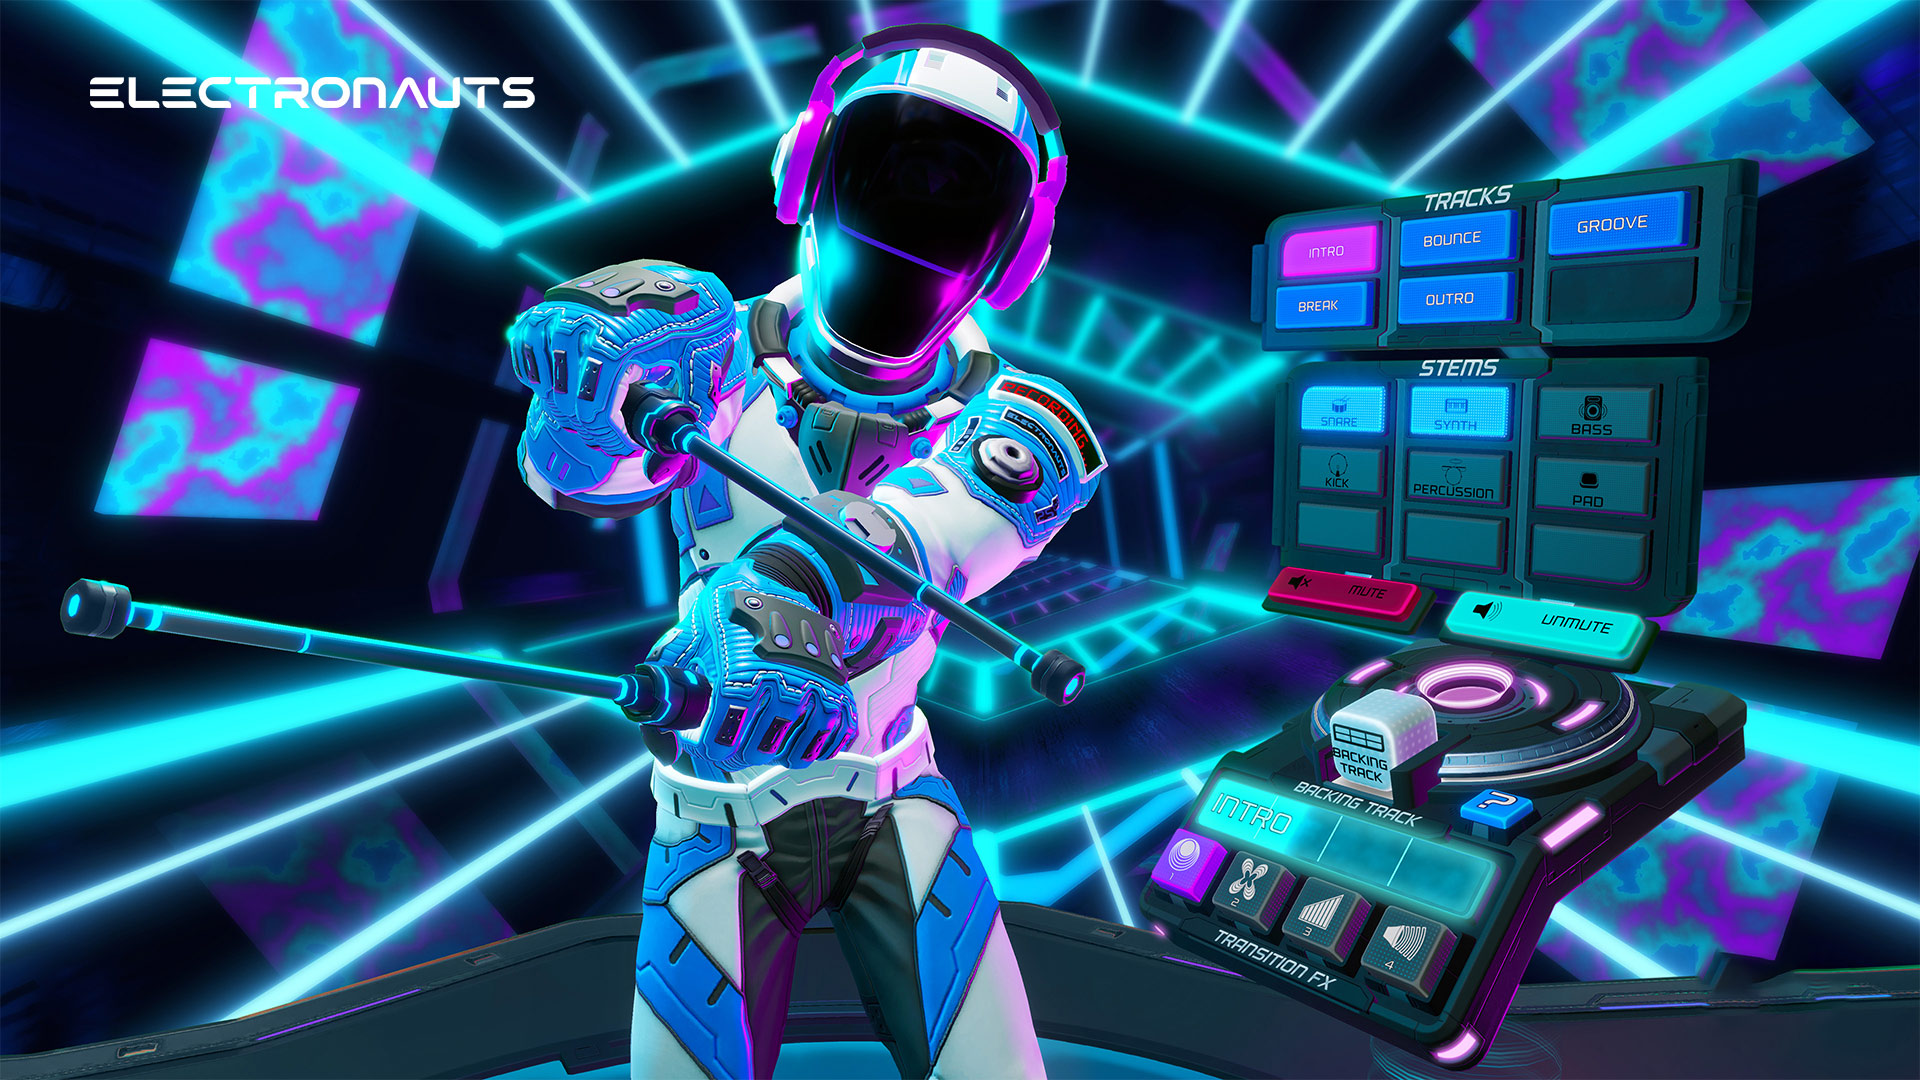 Inside VR Design: The Interface of ‘Electronauts’